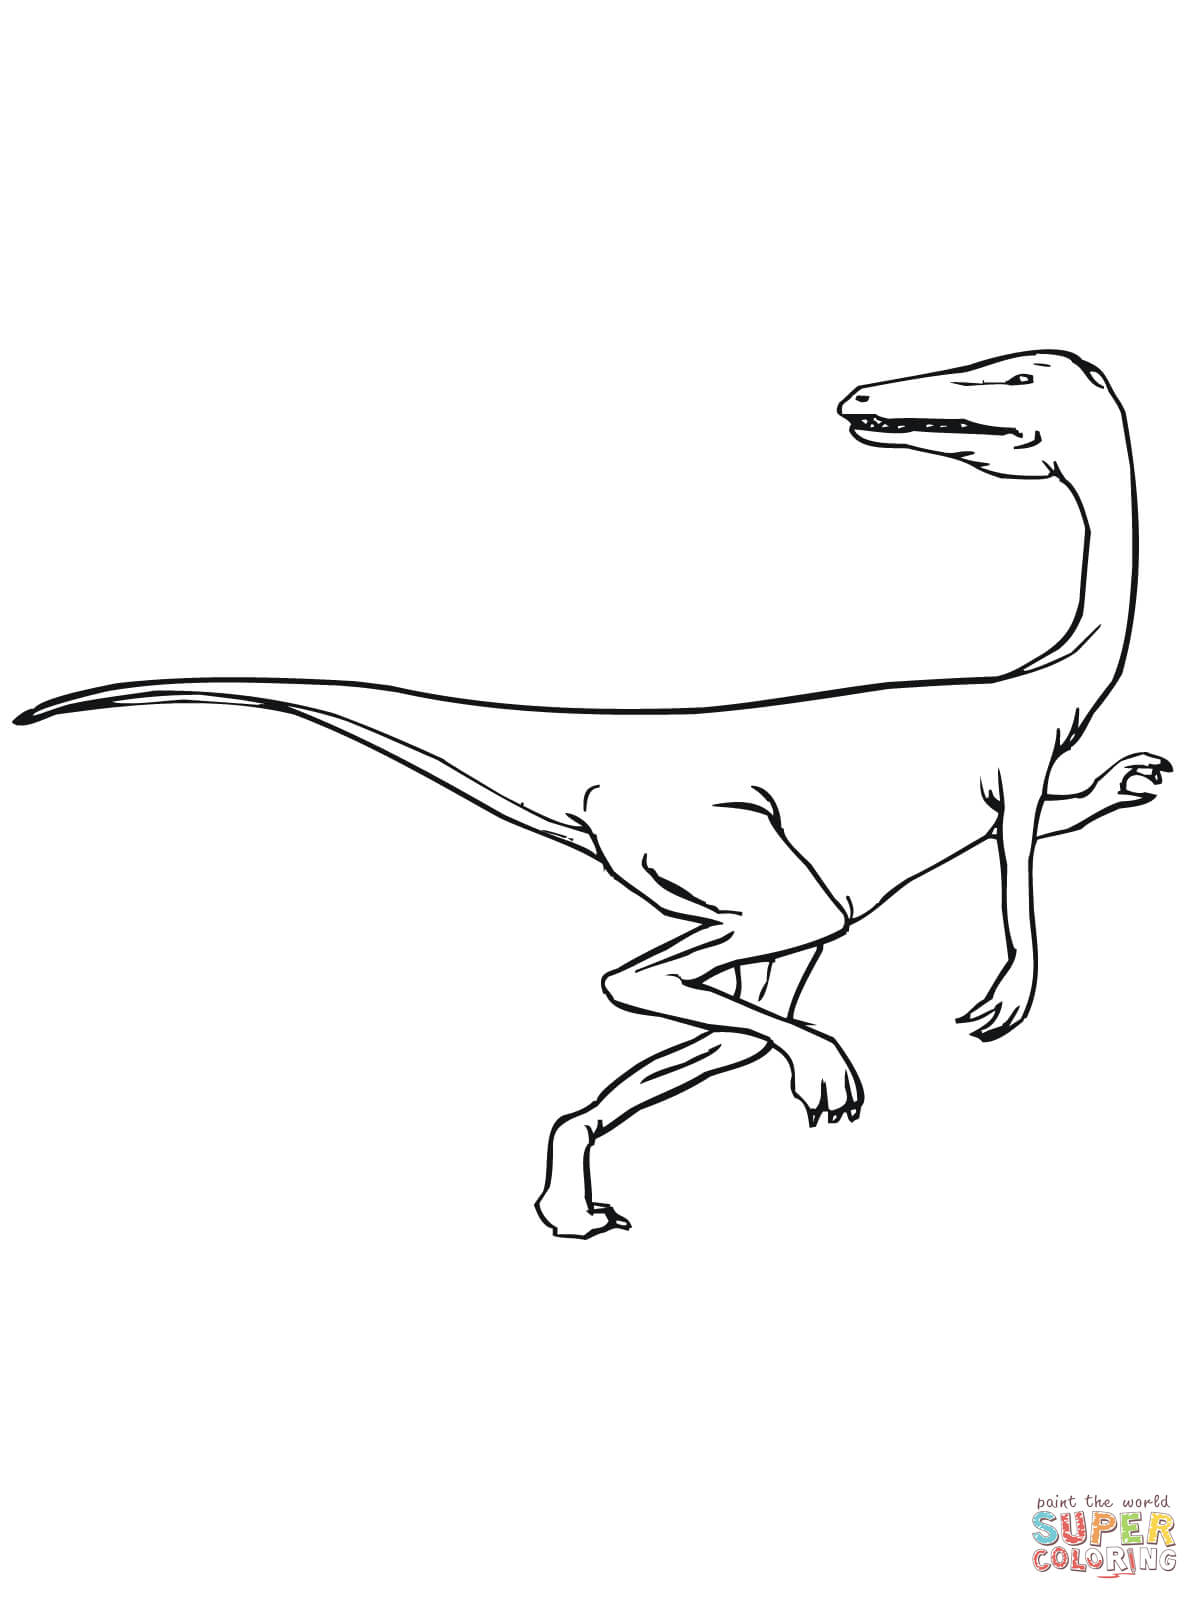 Velociraptor coloring pages | Free Coloring Pages